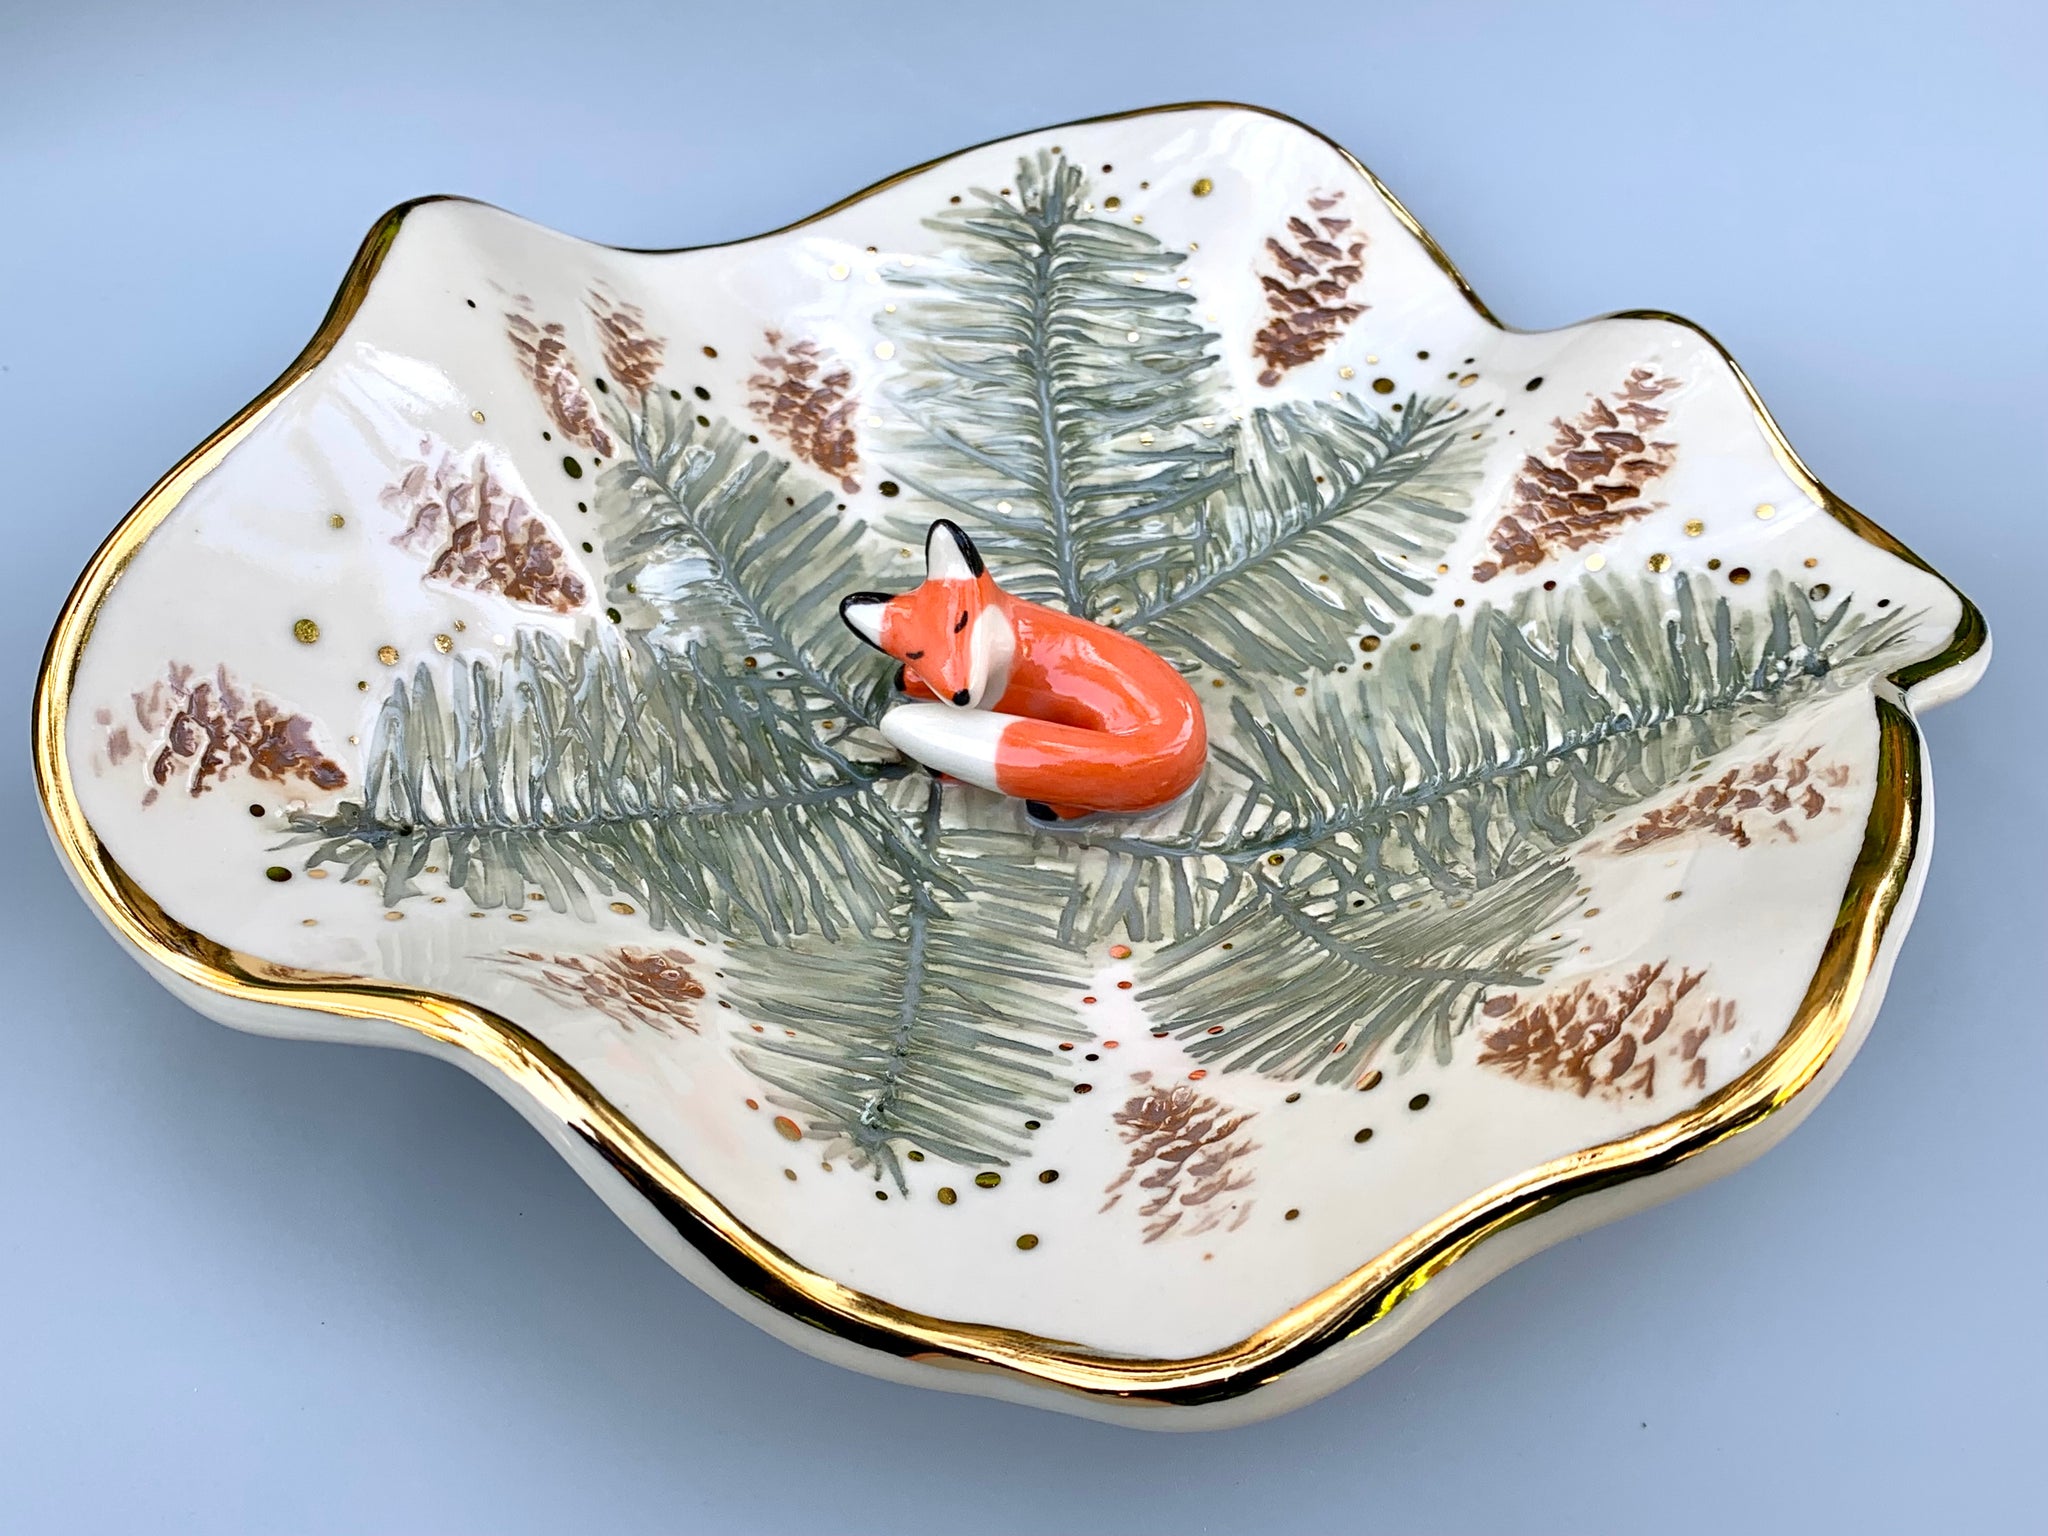 Ex-Large Fox and Evergreen Jewelry Holder, Ceramic Trinket Dish with Gold Accent